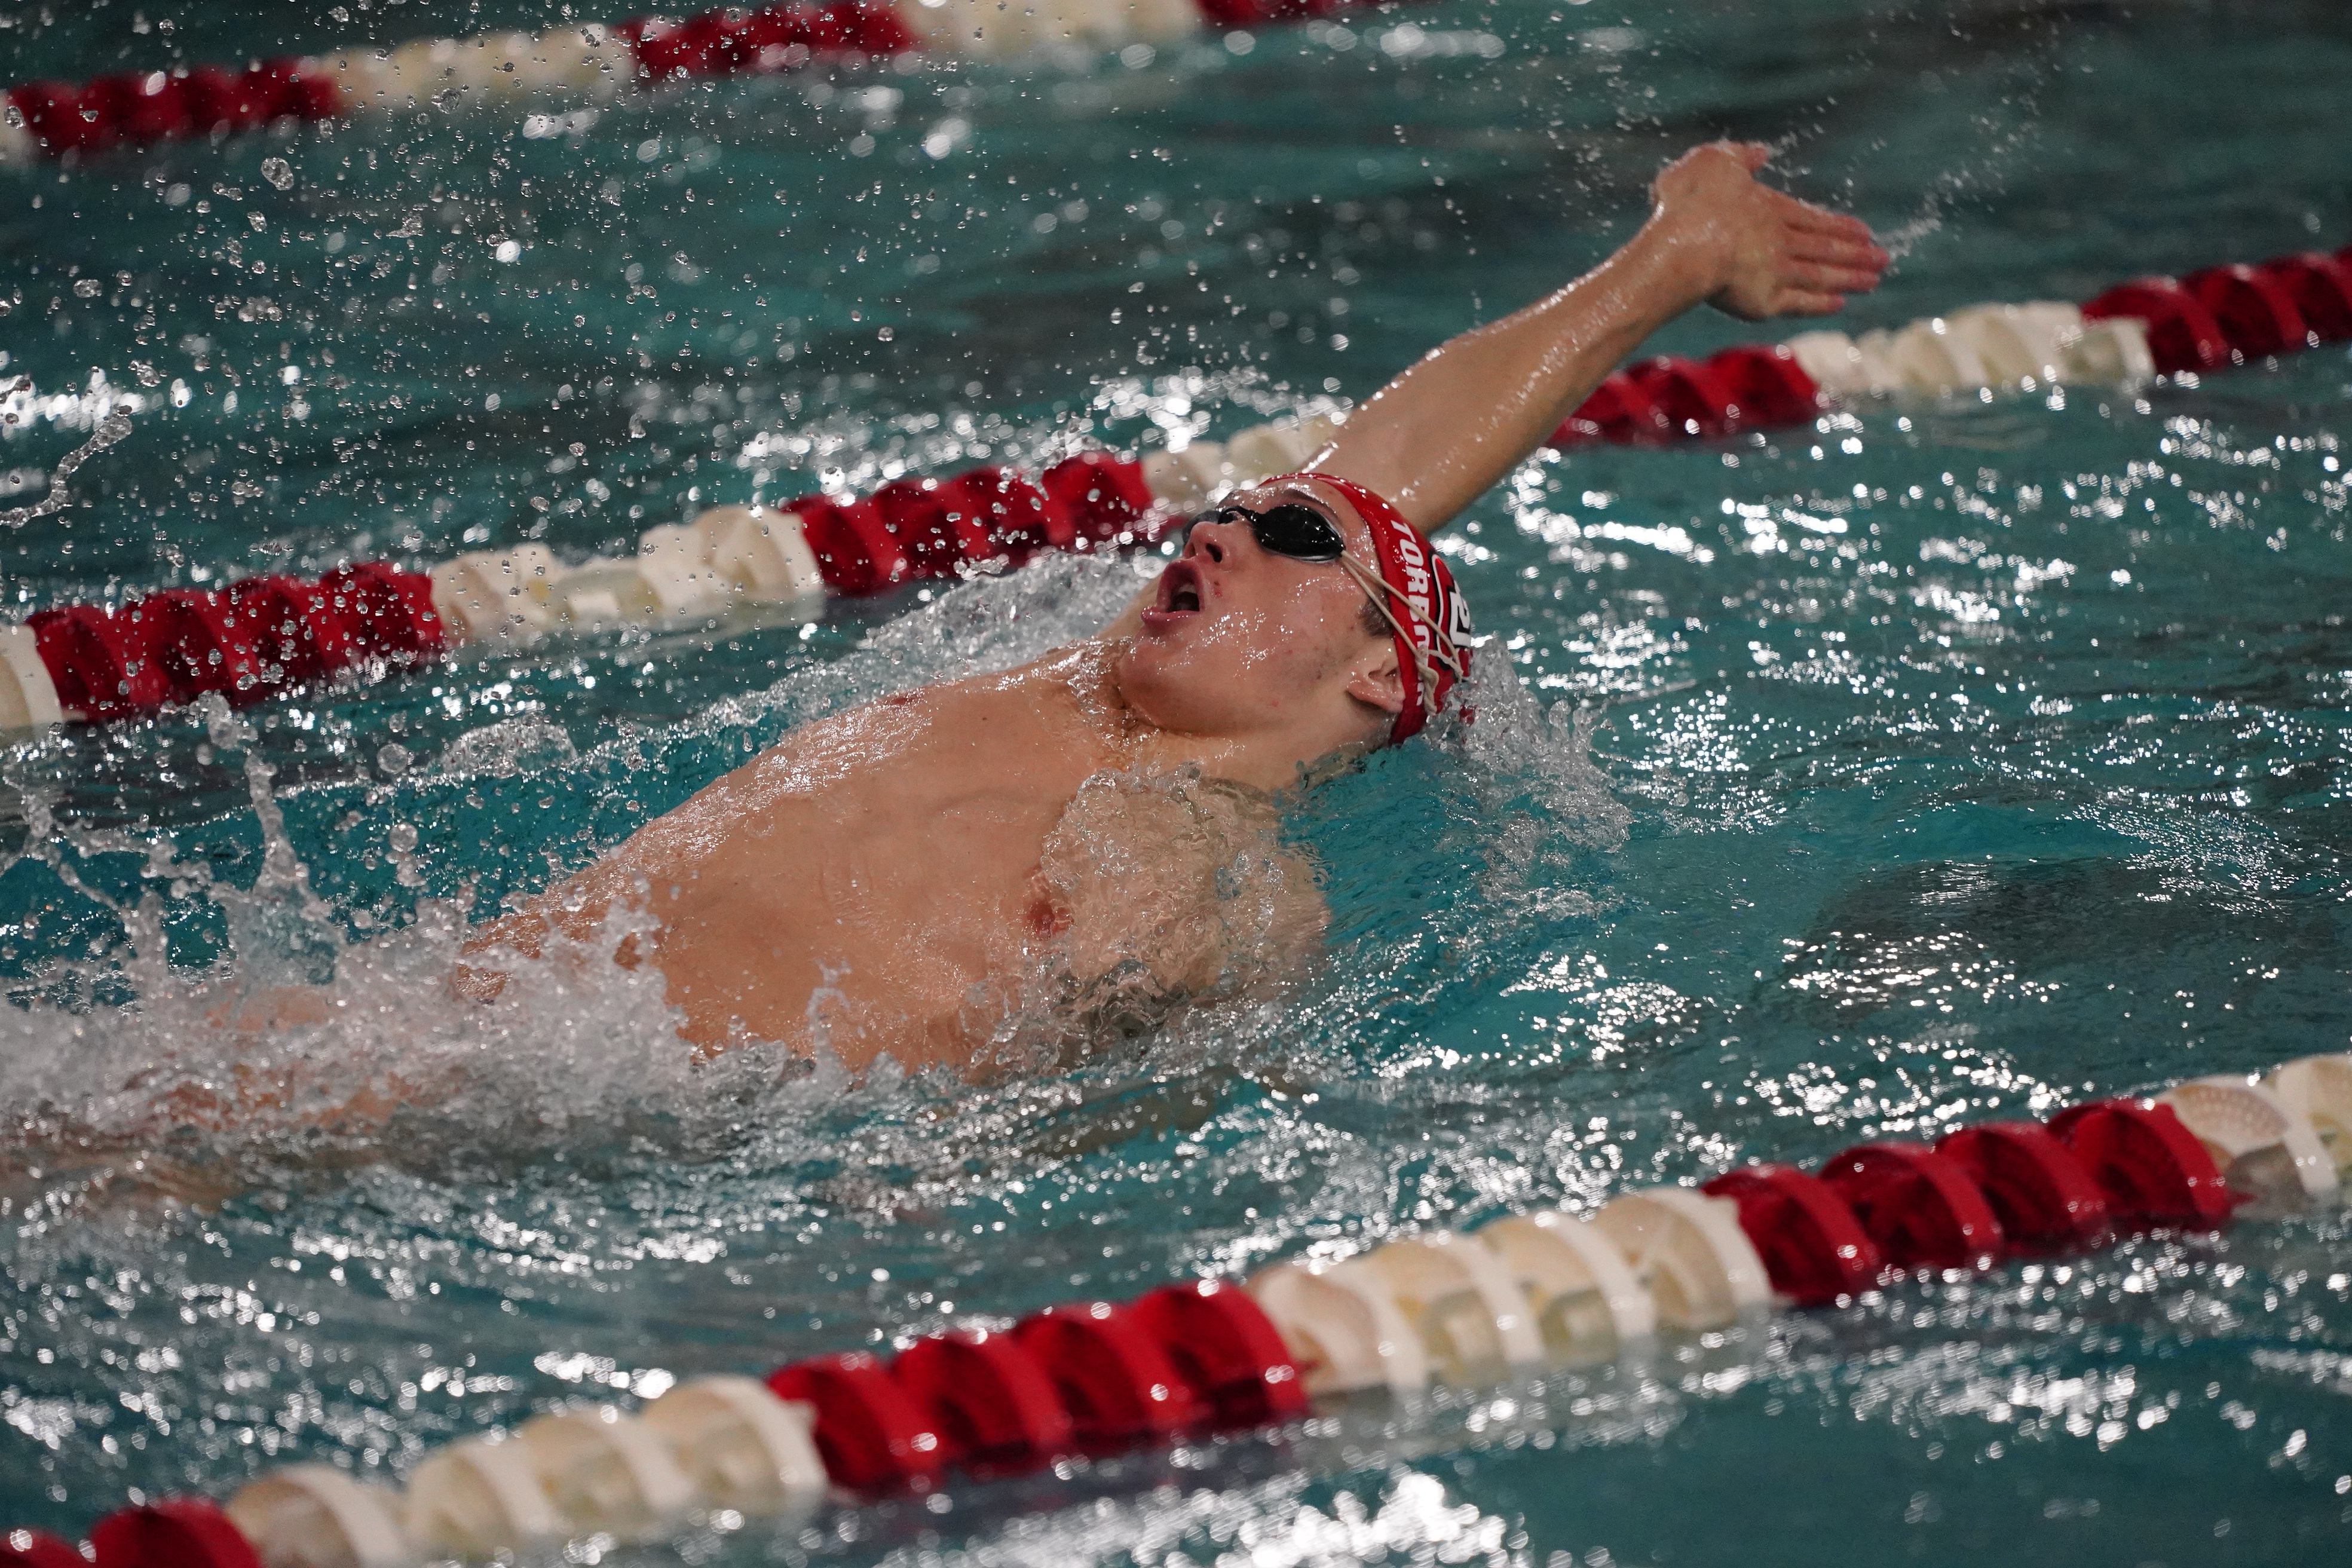 Coyote swimmers and divers have productive day in Sioux Falls